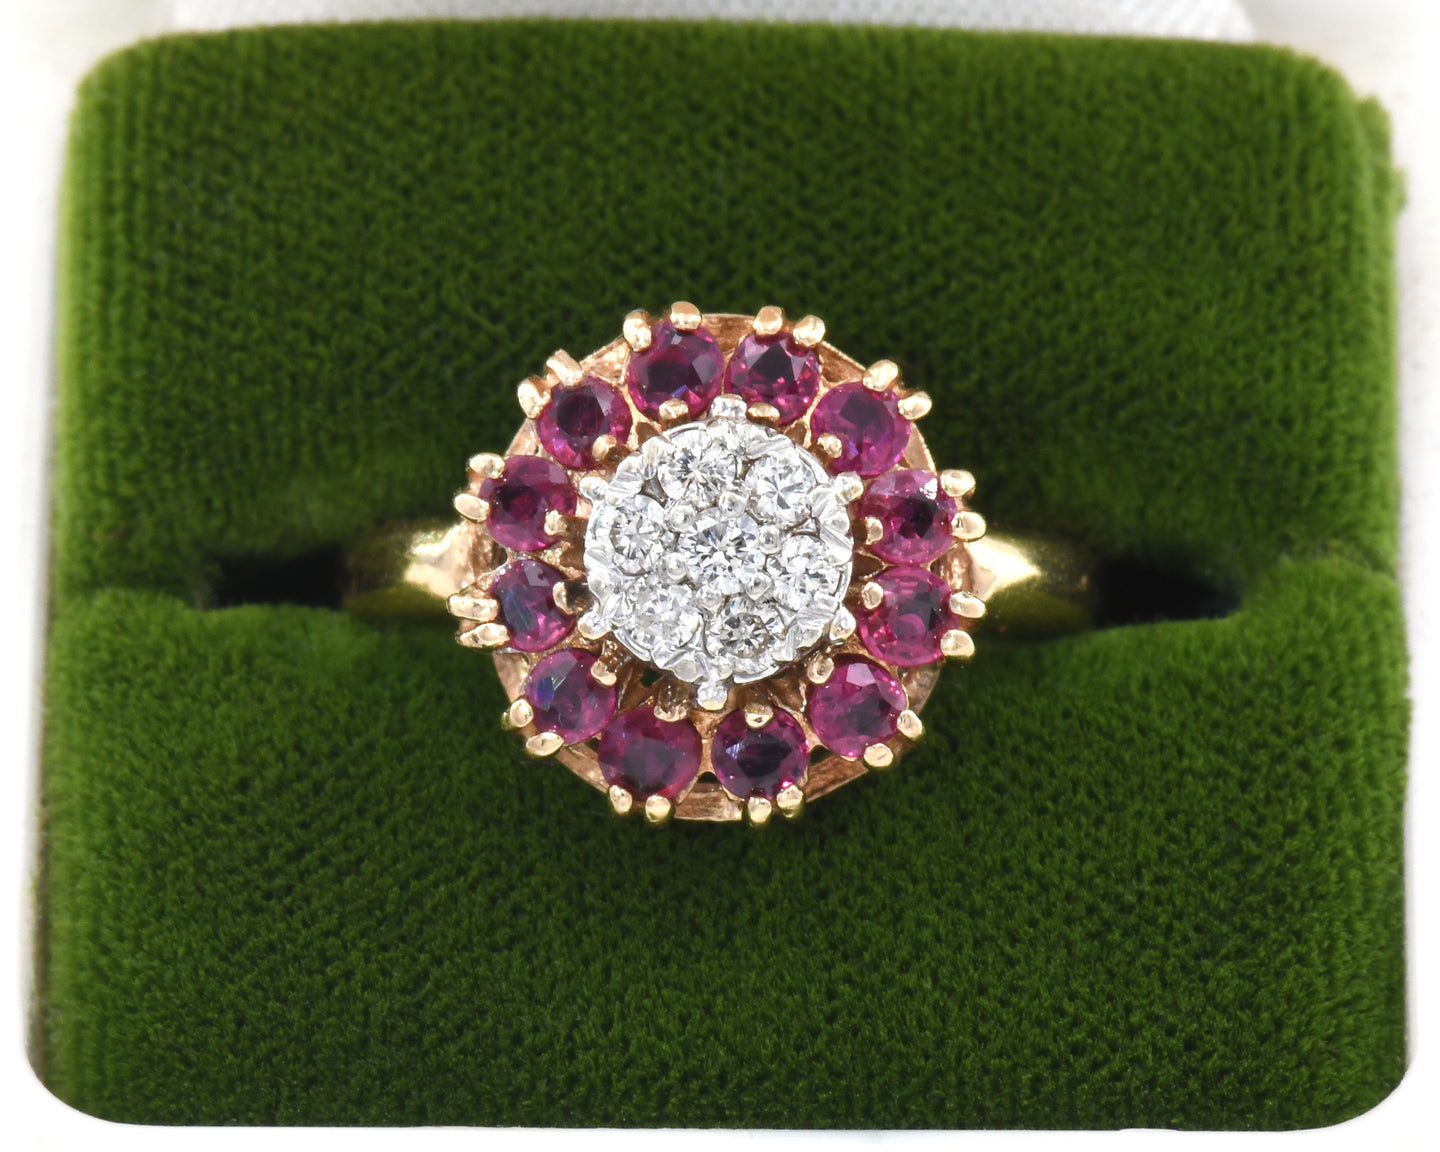 14K yellow and white gold ring set with rubies and diamonds